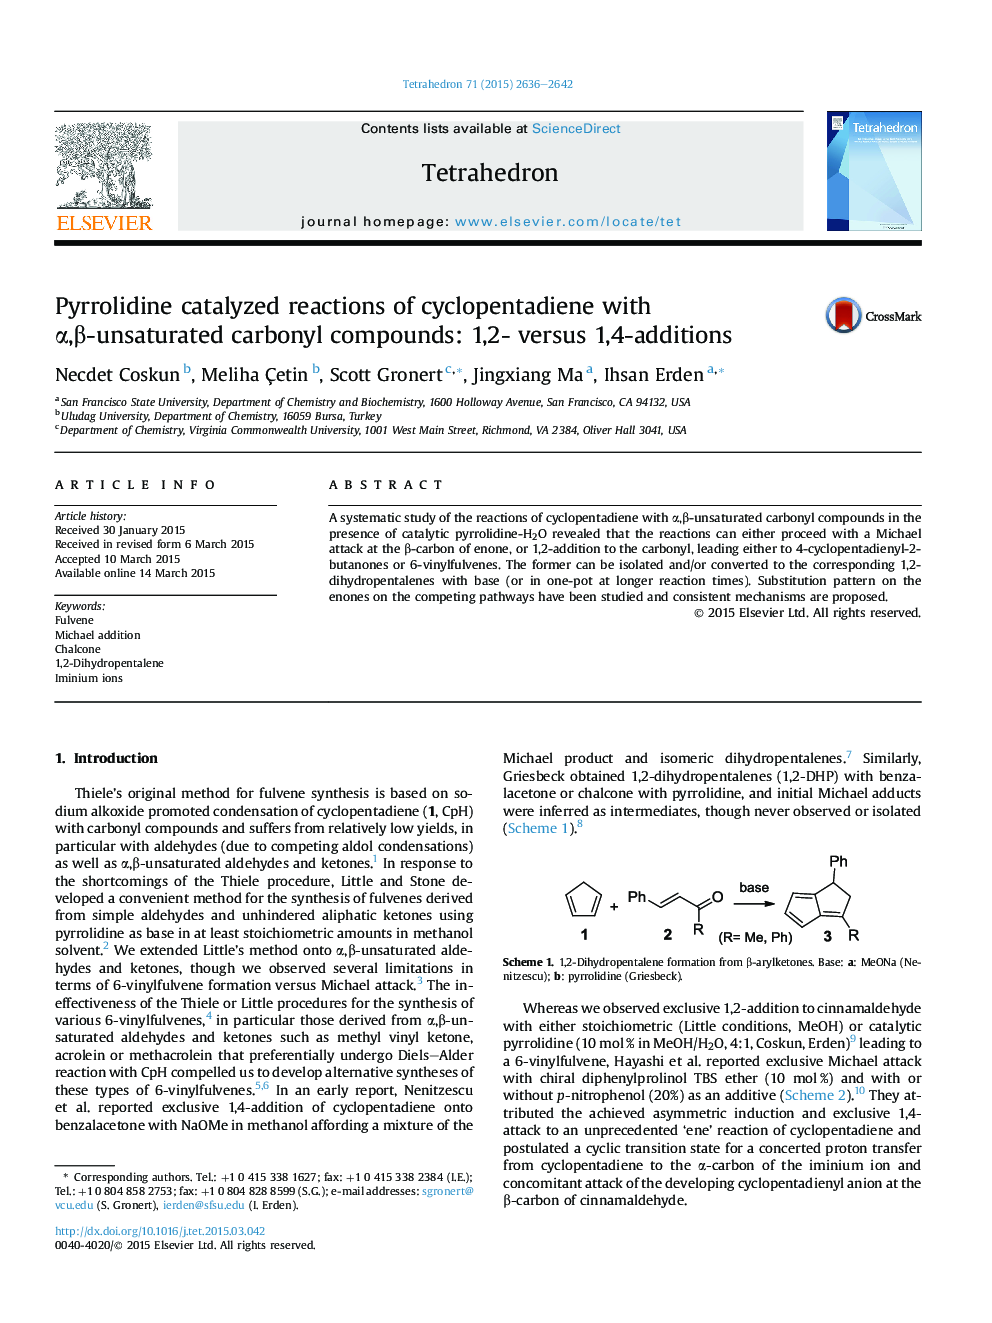 Pyrrolidine catalyzed reactions of cyclopentadiene with α,β-unsaturated carbonyl compounds: 1,2- versus 1,4-additions